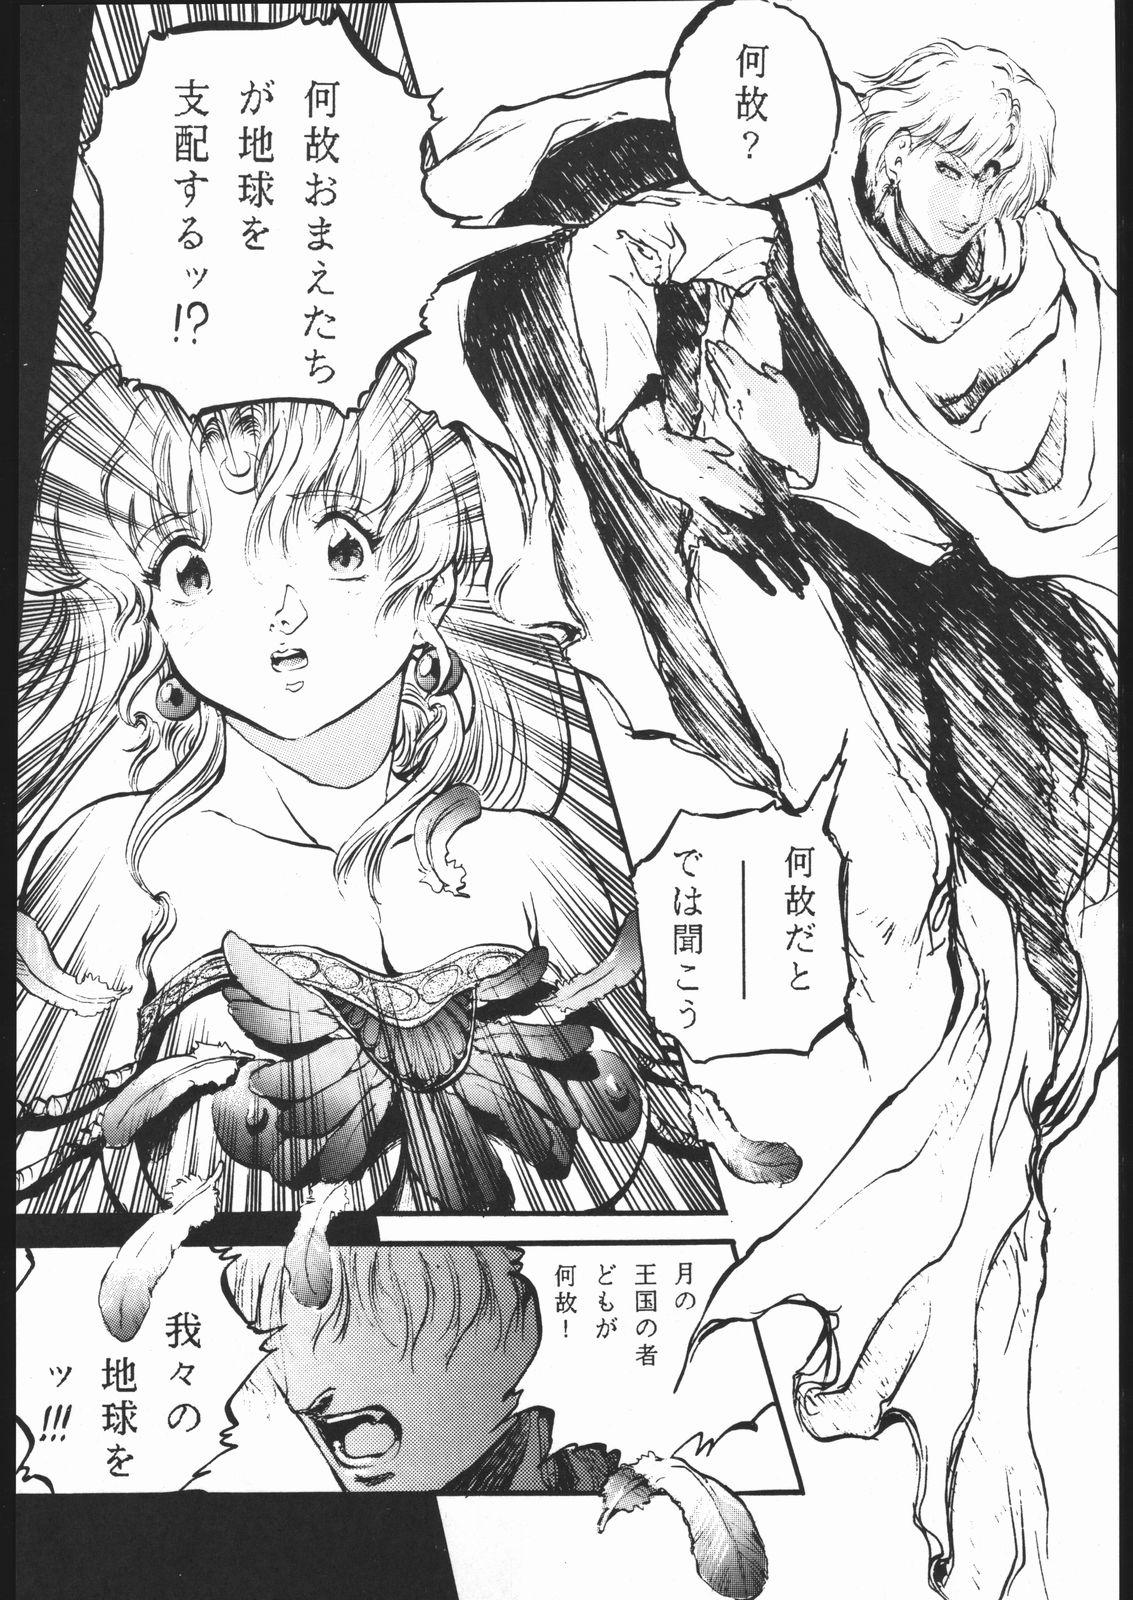 Breasts KATZE 8 - Sailor moon Tenchi muyo Ghost sweeper mikami Giant robo Victory gundam Amature Sex - Page 7